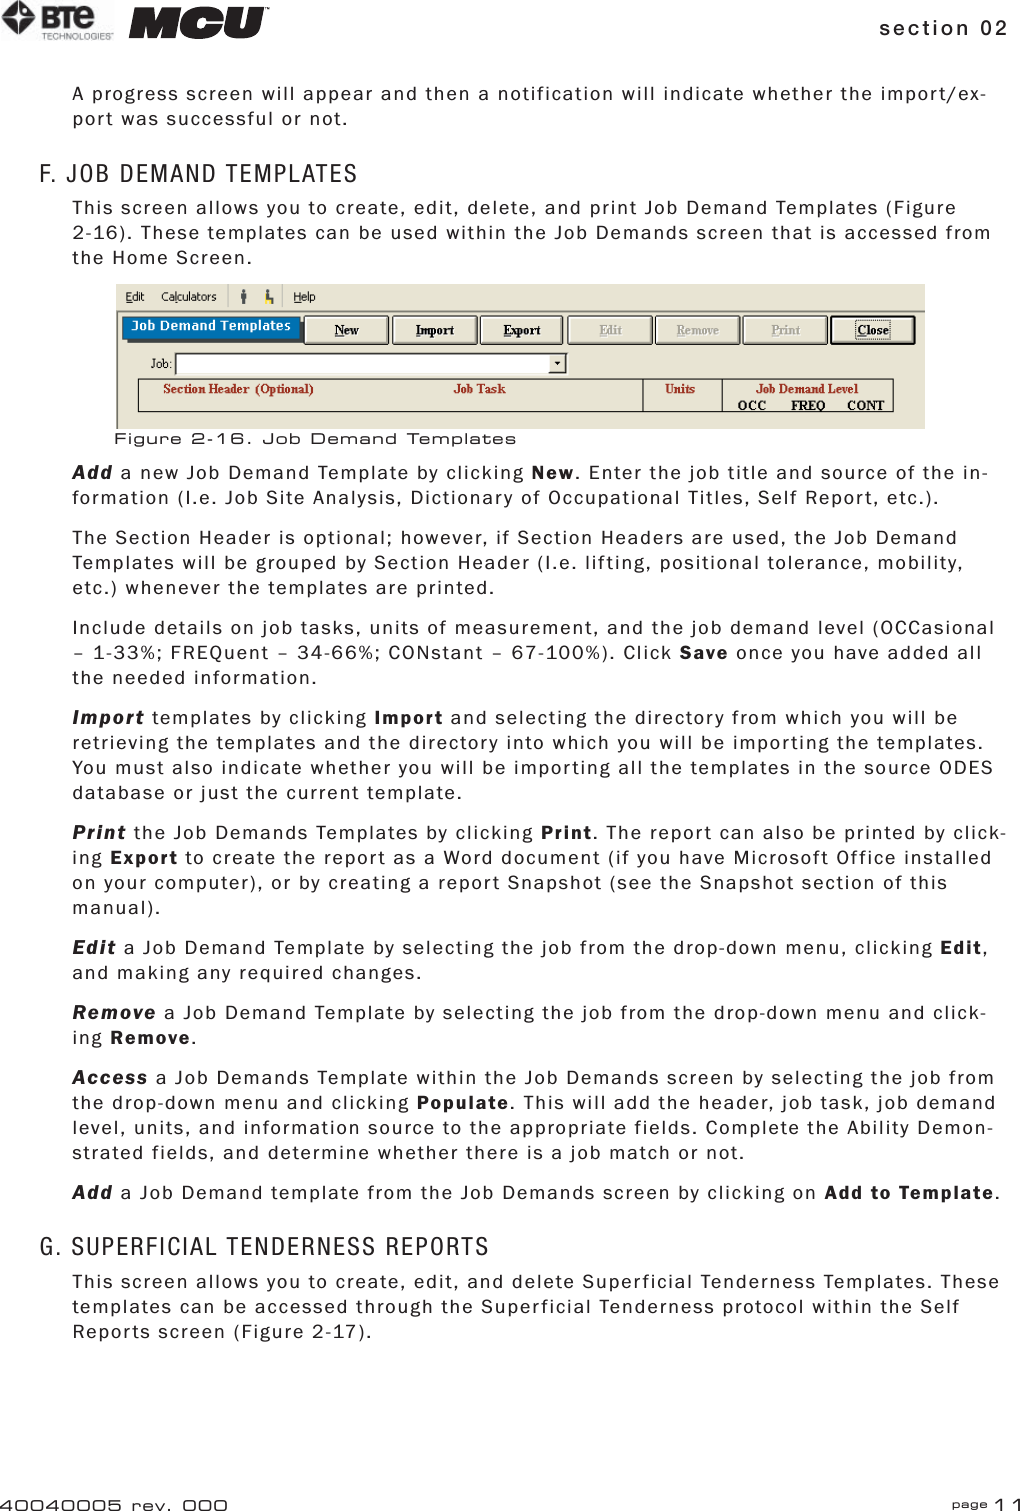 section 02 page 1140040005 rev. 000A progress screen will appear and then a notification will indicate whether the import/ex-port was successful or not.F. JOB DEMAND TEMPLATESThis screen allows you to create, edit, delete, and print Job Demand Templates (Figure 2-16). These templates can be used within the Job Demands screen that is accessed from the Home Screen.Add a new Job Demand Template by clicking New. Enter the job title and source of the in-formation (I.e. Job Site Analysis, Dictionary of Occupational Titles, Self Report, etc.).The Section Header is optional; however, if Section Headers are used, the Job Demand Templates will be grouped by Section Header (I.e. lifting, positional tolerance, mobility, etc.) whenever the templates are printed.Include details on job tasks, units of measurement, and the job demand level (OCCasional – 1-33%; FREQuent – 34-66%; CONstant – 67-100%). Click Save once you have added all the needed information.Import templates by clicking Import and selecting the directory from which you will be retrieving the templates and the directory into which you will be importing the templates. You must also indicate whether you will be importing all the templates in the source ODES database or just the current template.Print the Job Demands Templates by clicking Print. The report can also be printed by click-ing Export to create the report as a Word document (if you have Microsoft Office installed on your computer), or by creating a report Snapshot (see the Snapshot section of this manual).Edit a Job Demand Template by selecting the job from the drop-down menu, clicking Edit, and making any required changes.Remove a Job Demand Template by selecting the job from the drop-down menu and click-ing Remove.Access a Job Demands Template within the Job Demands screen by selecting the job from the drop-down menu and clicking Populate. This will add the header, job task, job demand level, units, and information source to the appropriate fields. Complete the Ability Demon-strated fields, and determine whether there is a job match or not.Add a Job Demand template from the Job Demands screen by clicking on Add to Template.G. SUPERFICIAL TENDERNESS REPORTSThis screen allows you to create, edit, and delete Superficial Tenderness Templates. These templates can be accessed through the Superficial Tenderness protocol within the Self Reports screen (Figure 2-17).Figure 2-16. Job Demand Templates